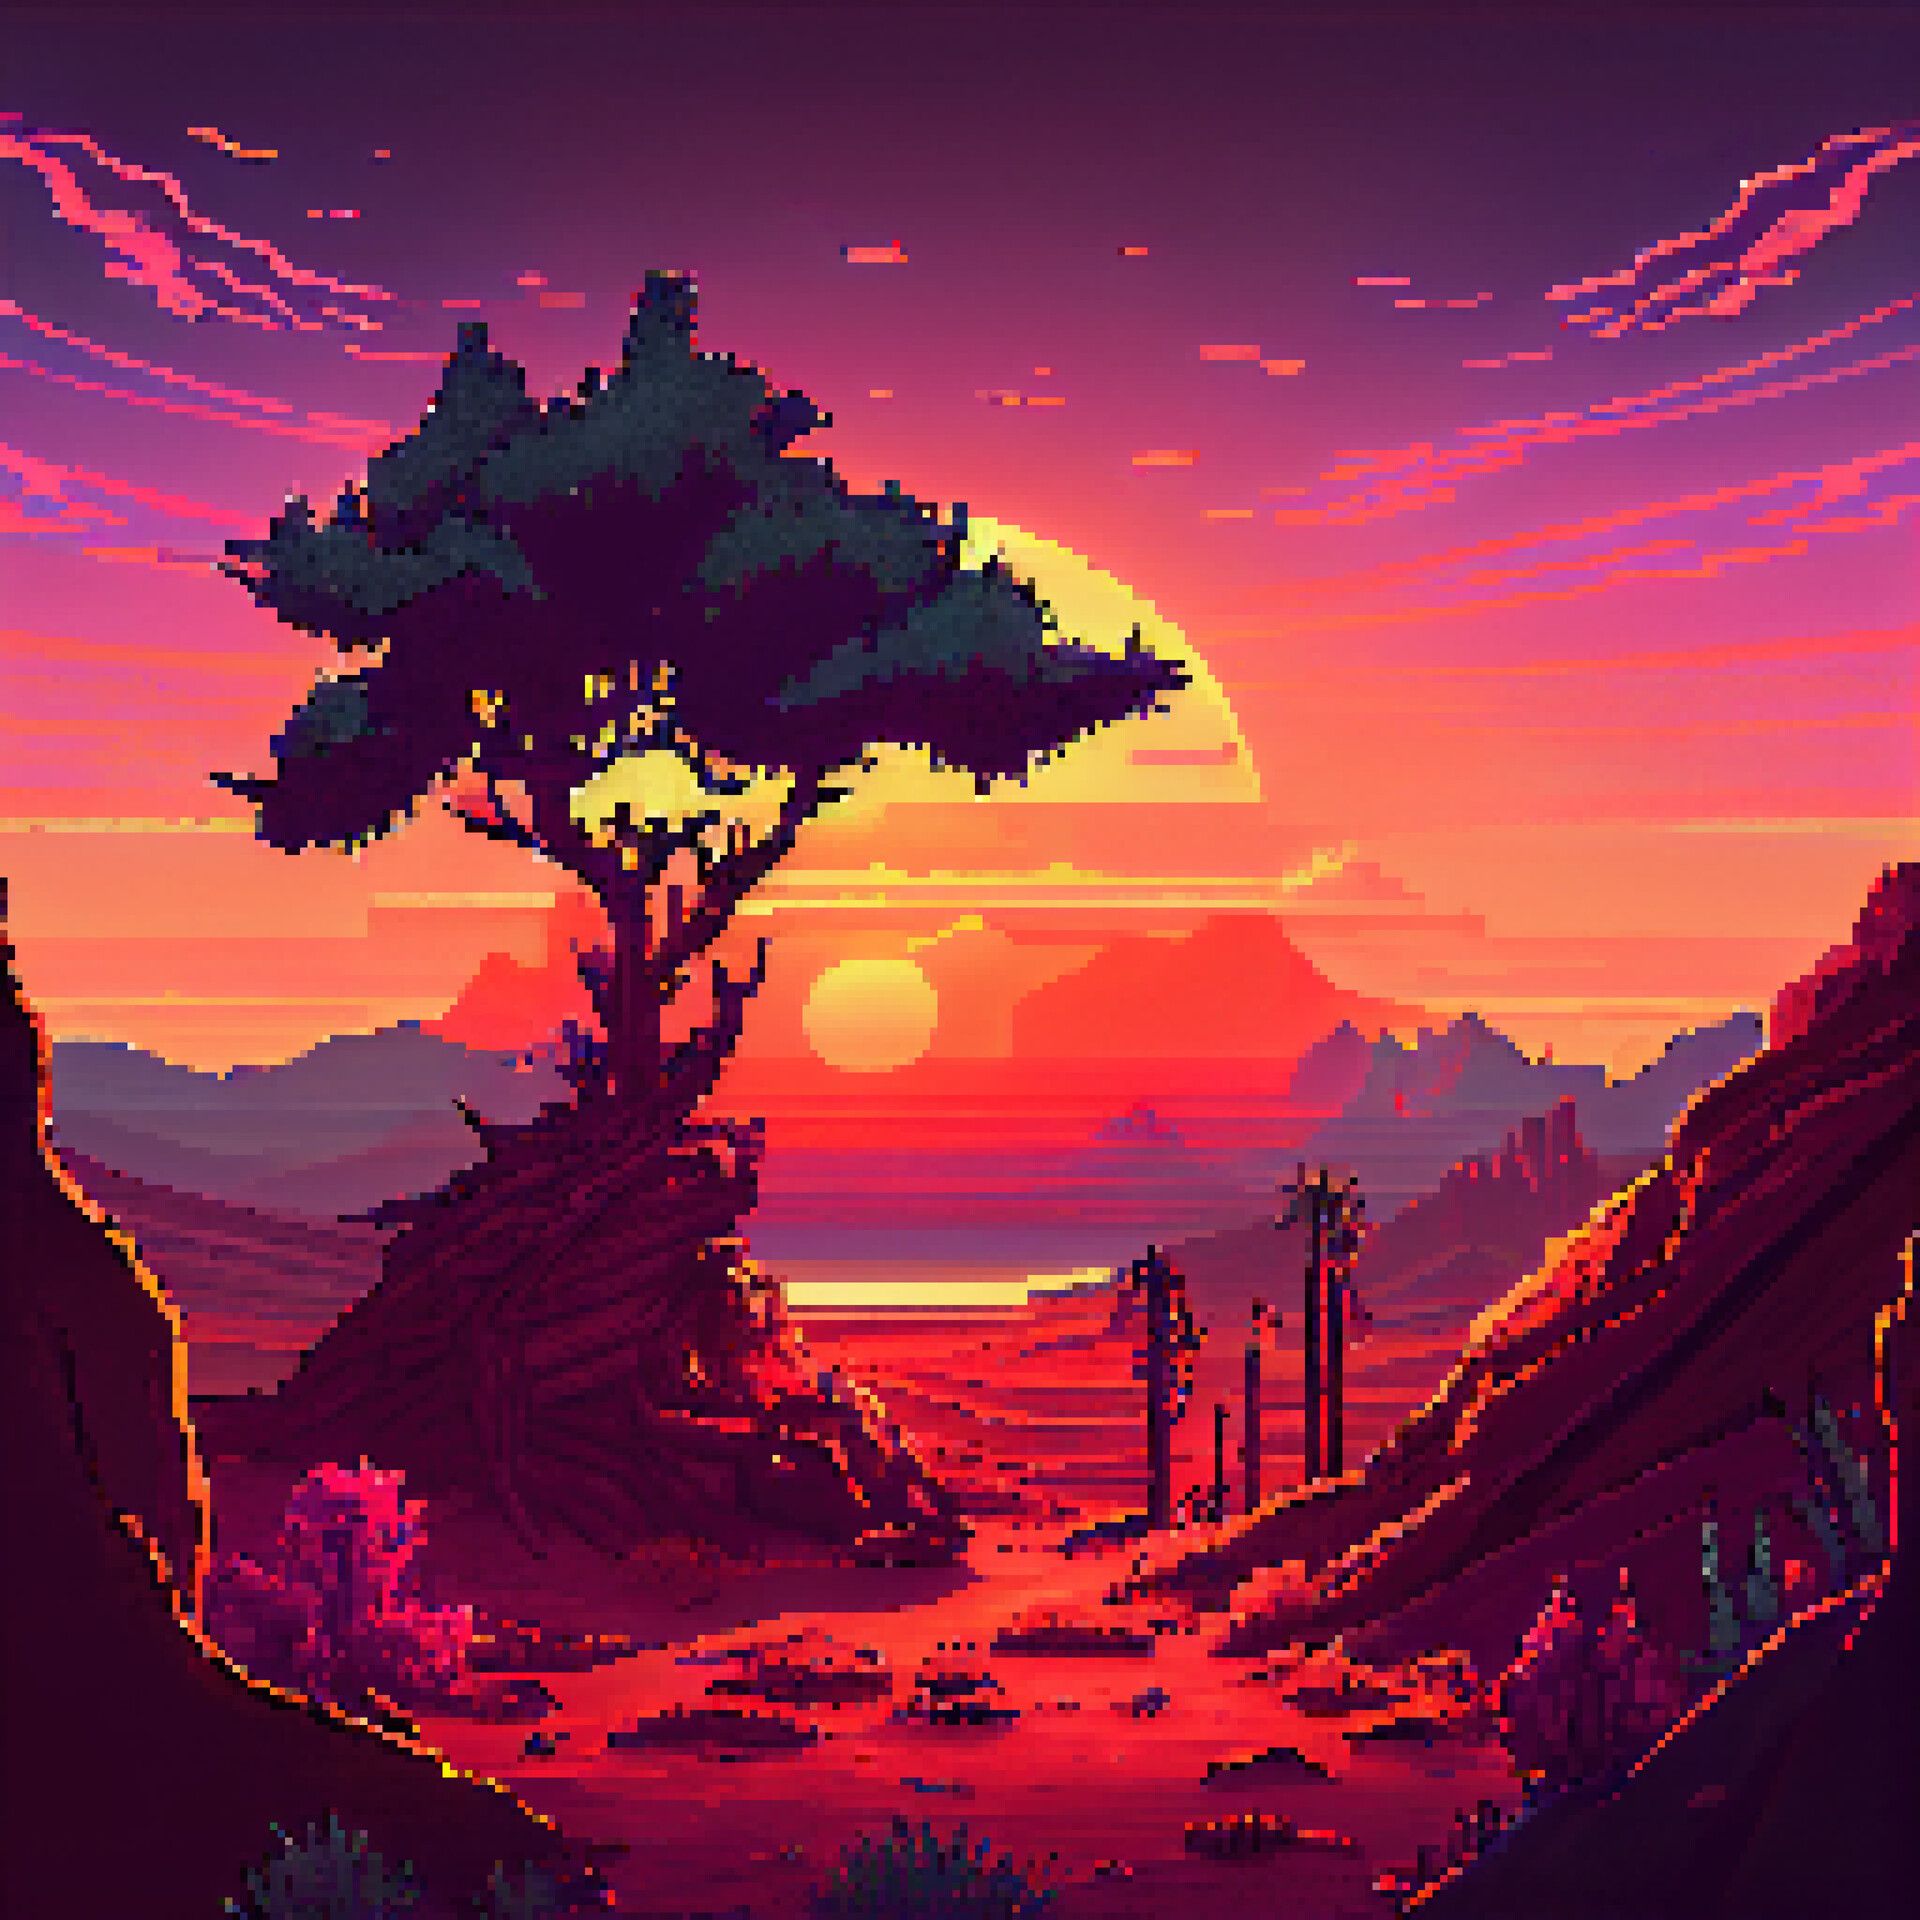 The sunset in a desert with trees and mountains - Pixel art